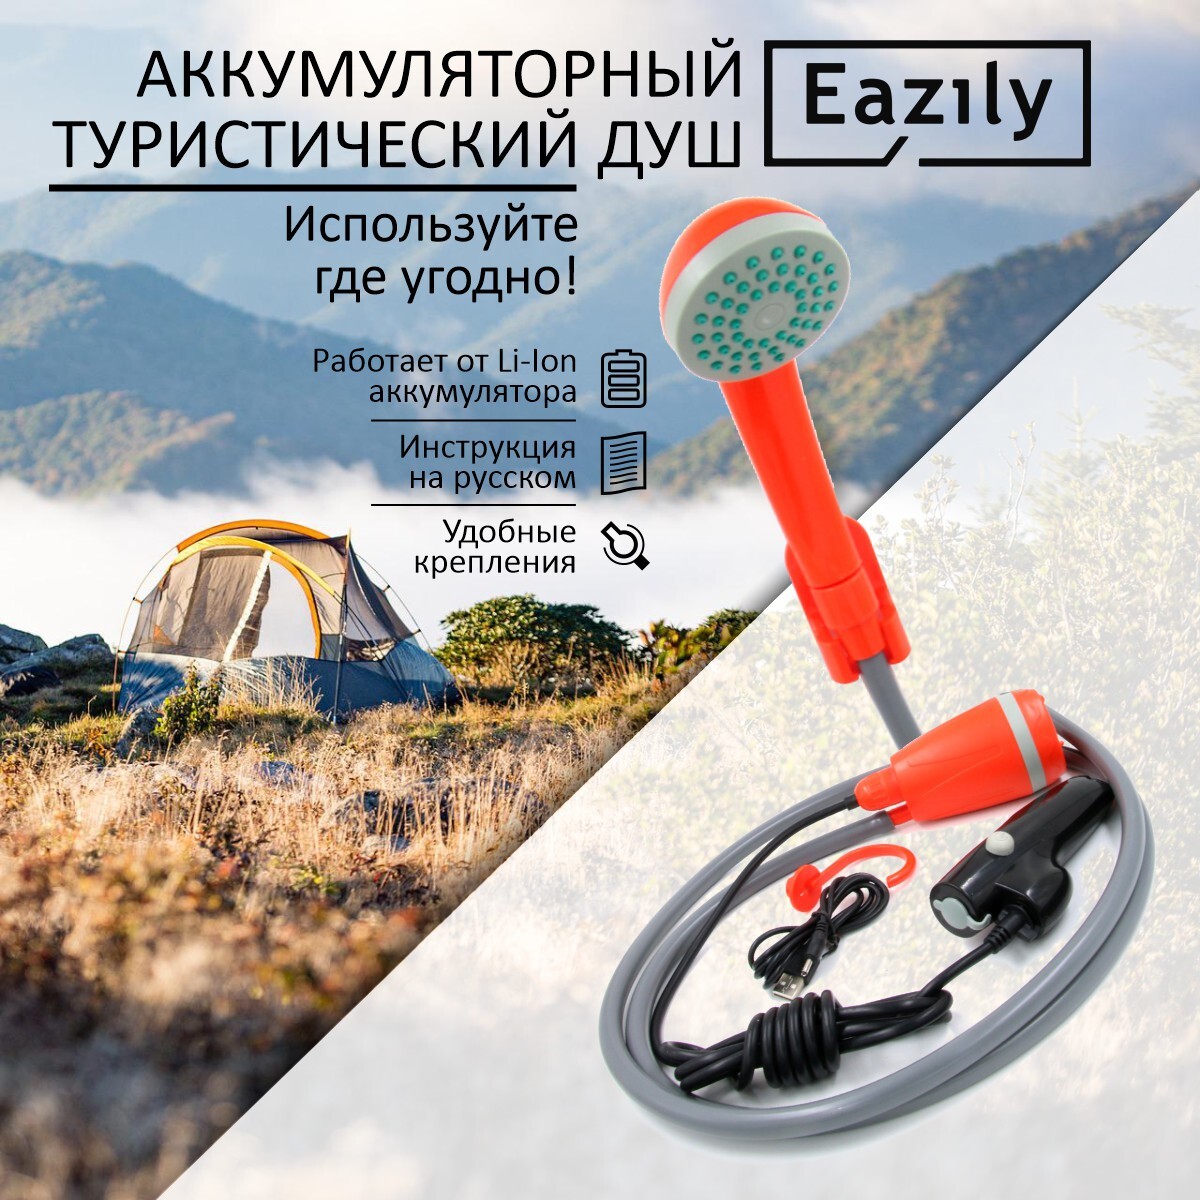 Perfect for Your Hygiene Essentials When Enjoying the Outdoor Life. Handheld Efficient Powerful Showering Outdoor Portable Camping Beach Shower-Very Versatile and Compact USB Rechargeable Batteries 